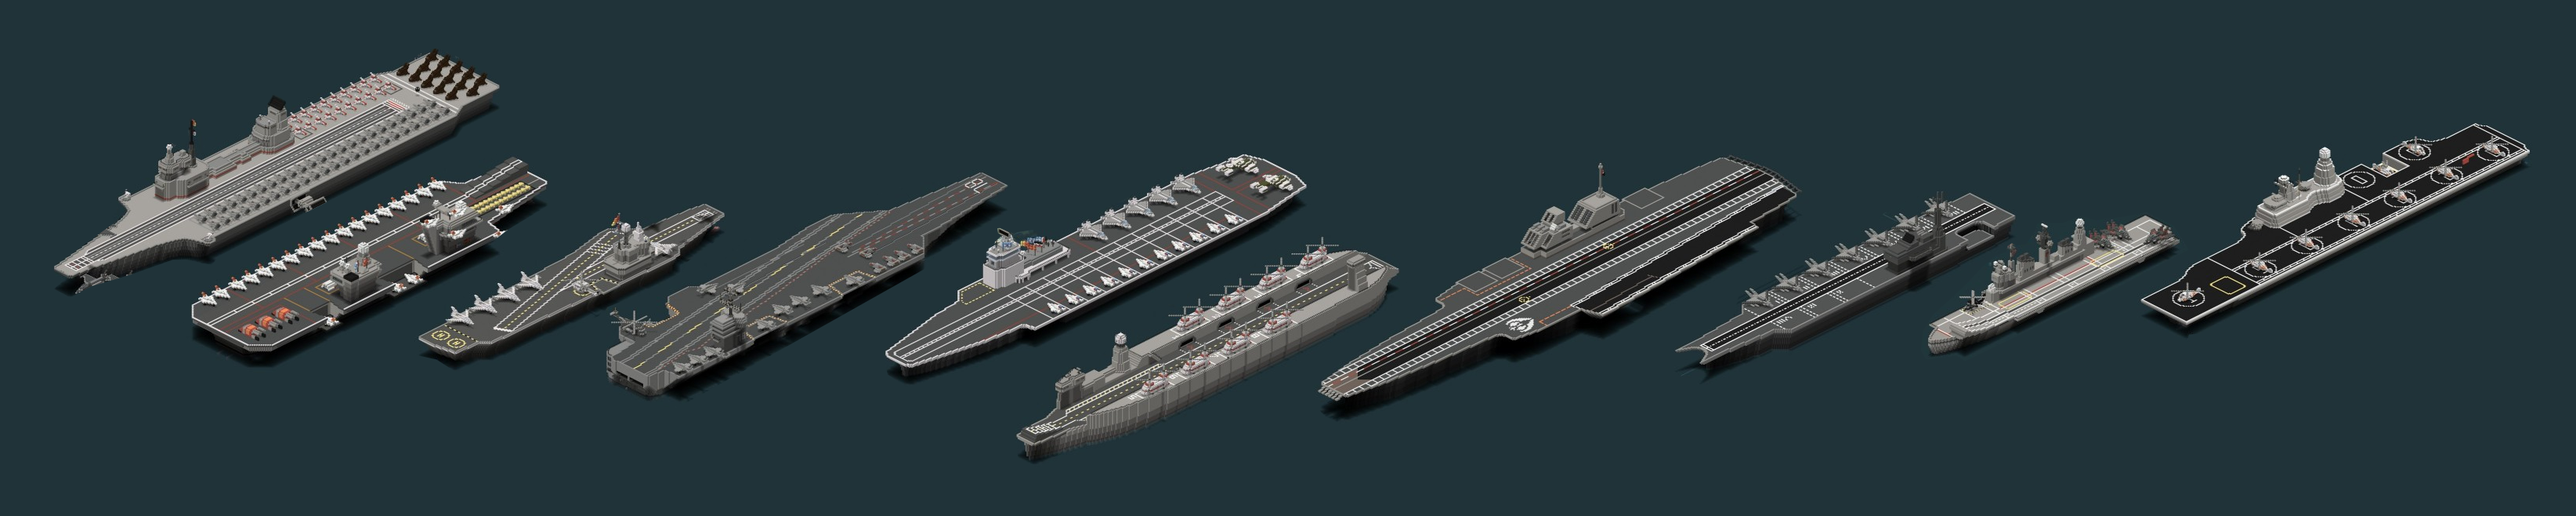 Selection of aircraft carriers from Utopia.